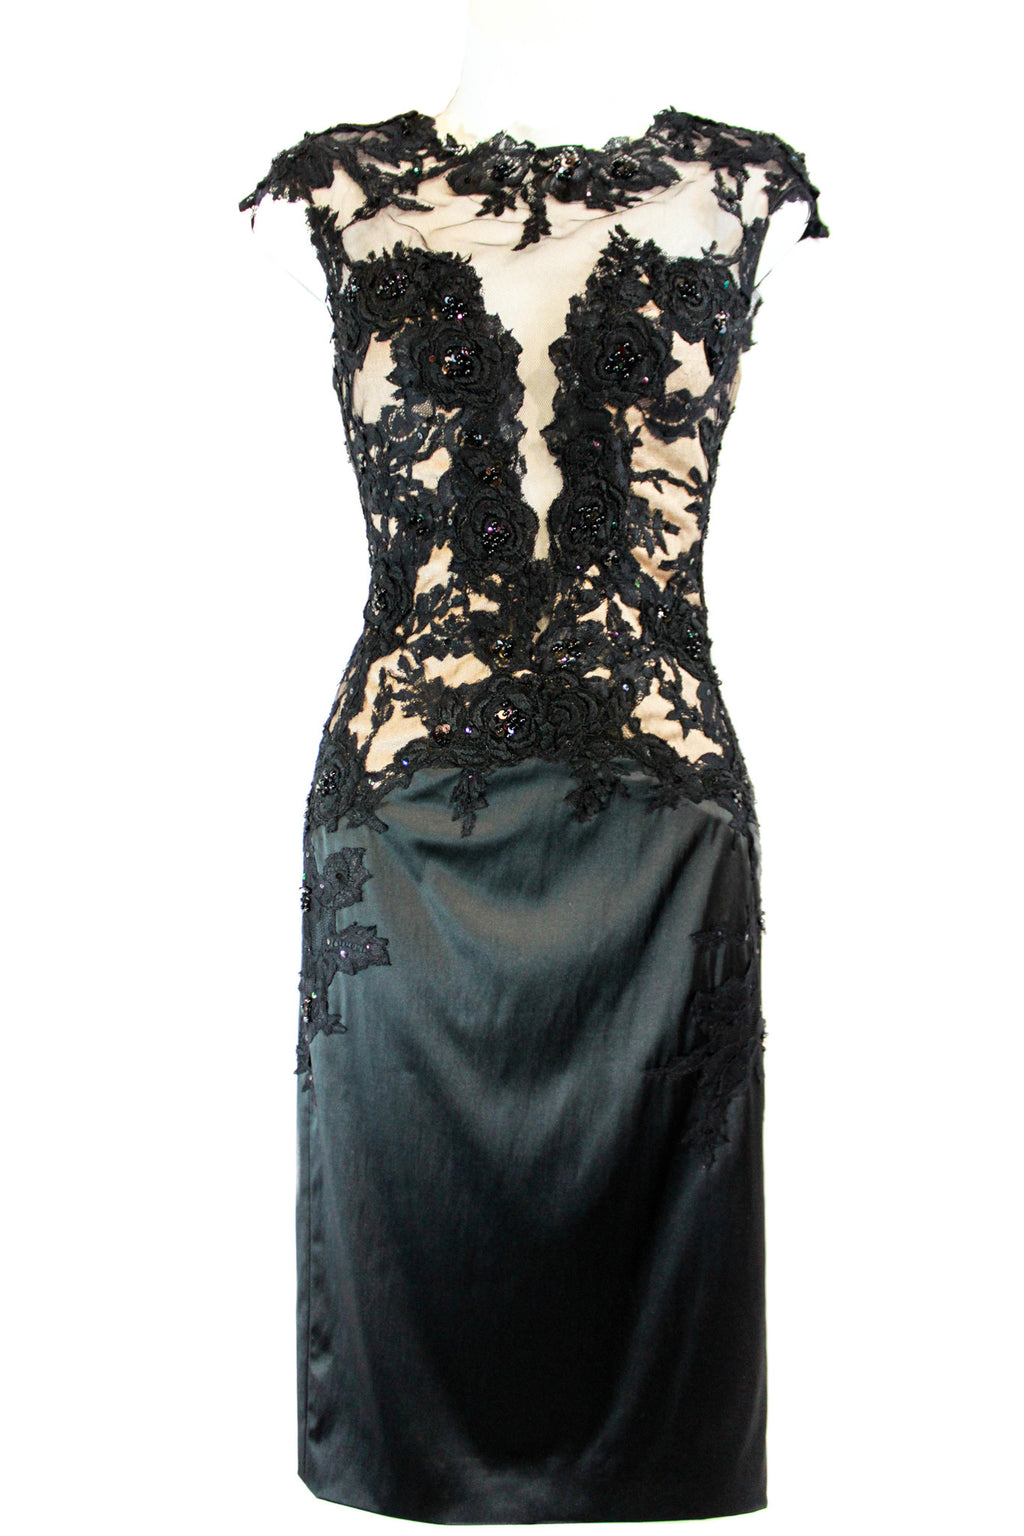 Vintage Style Cocktail Dress with Lace Bodice